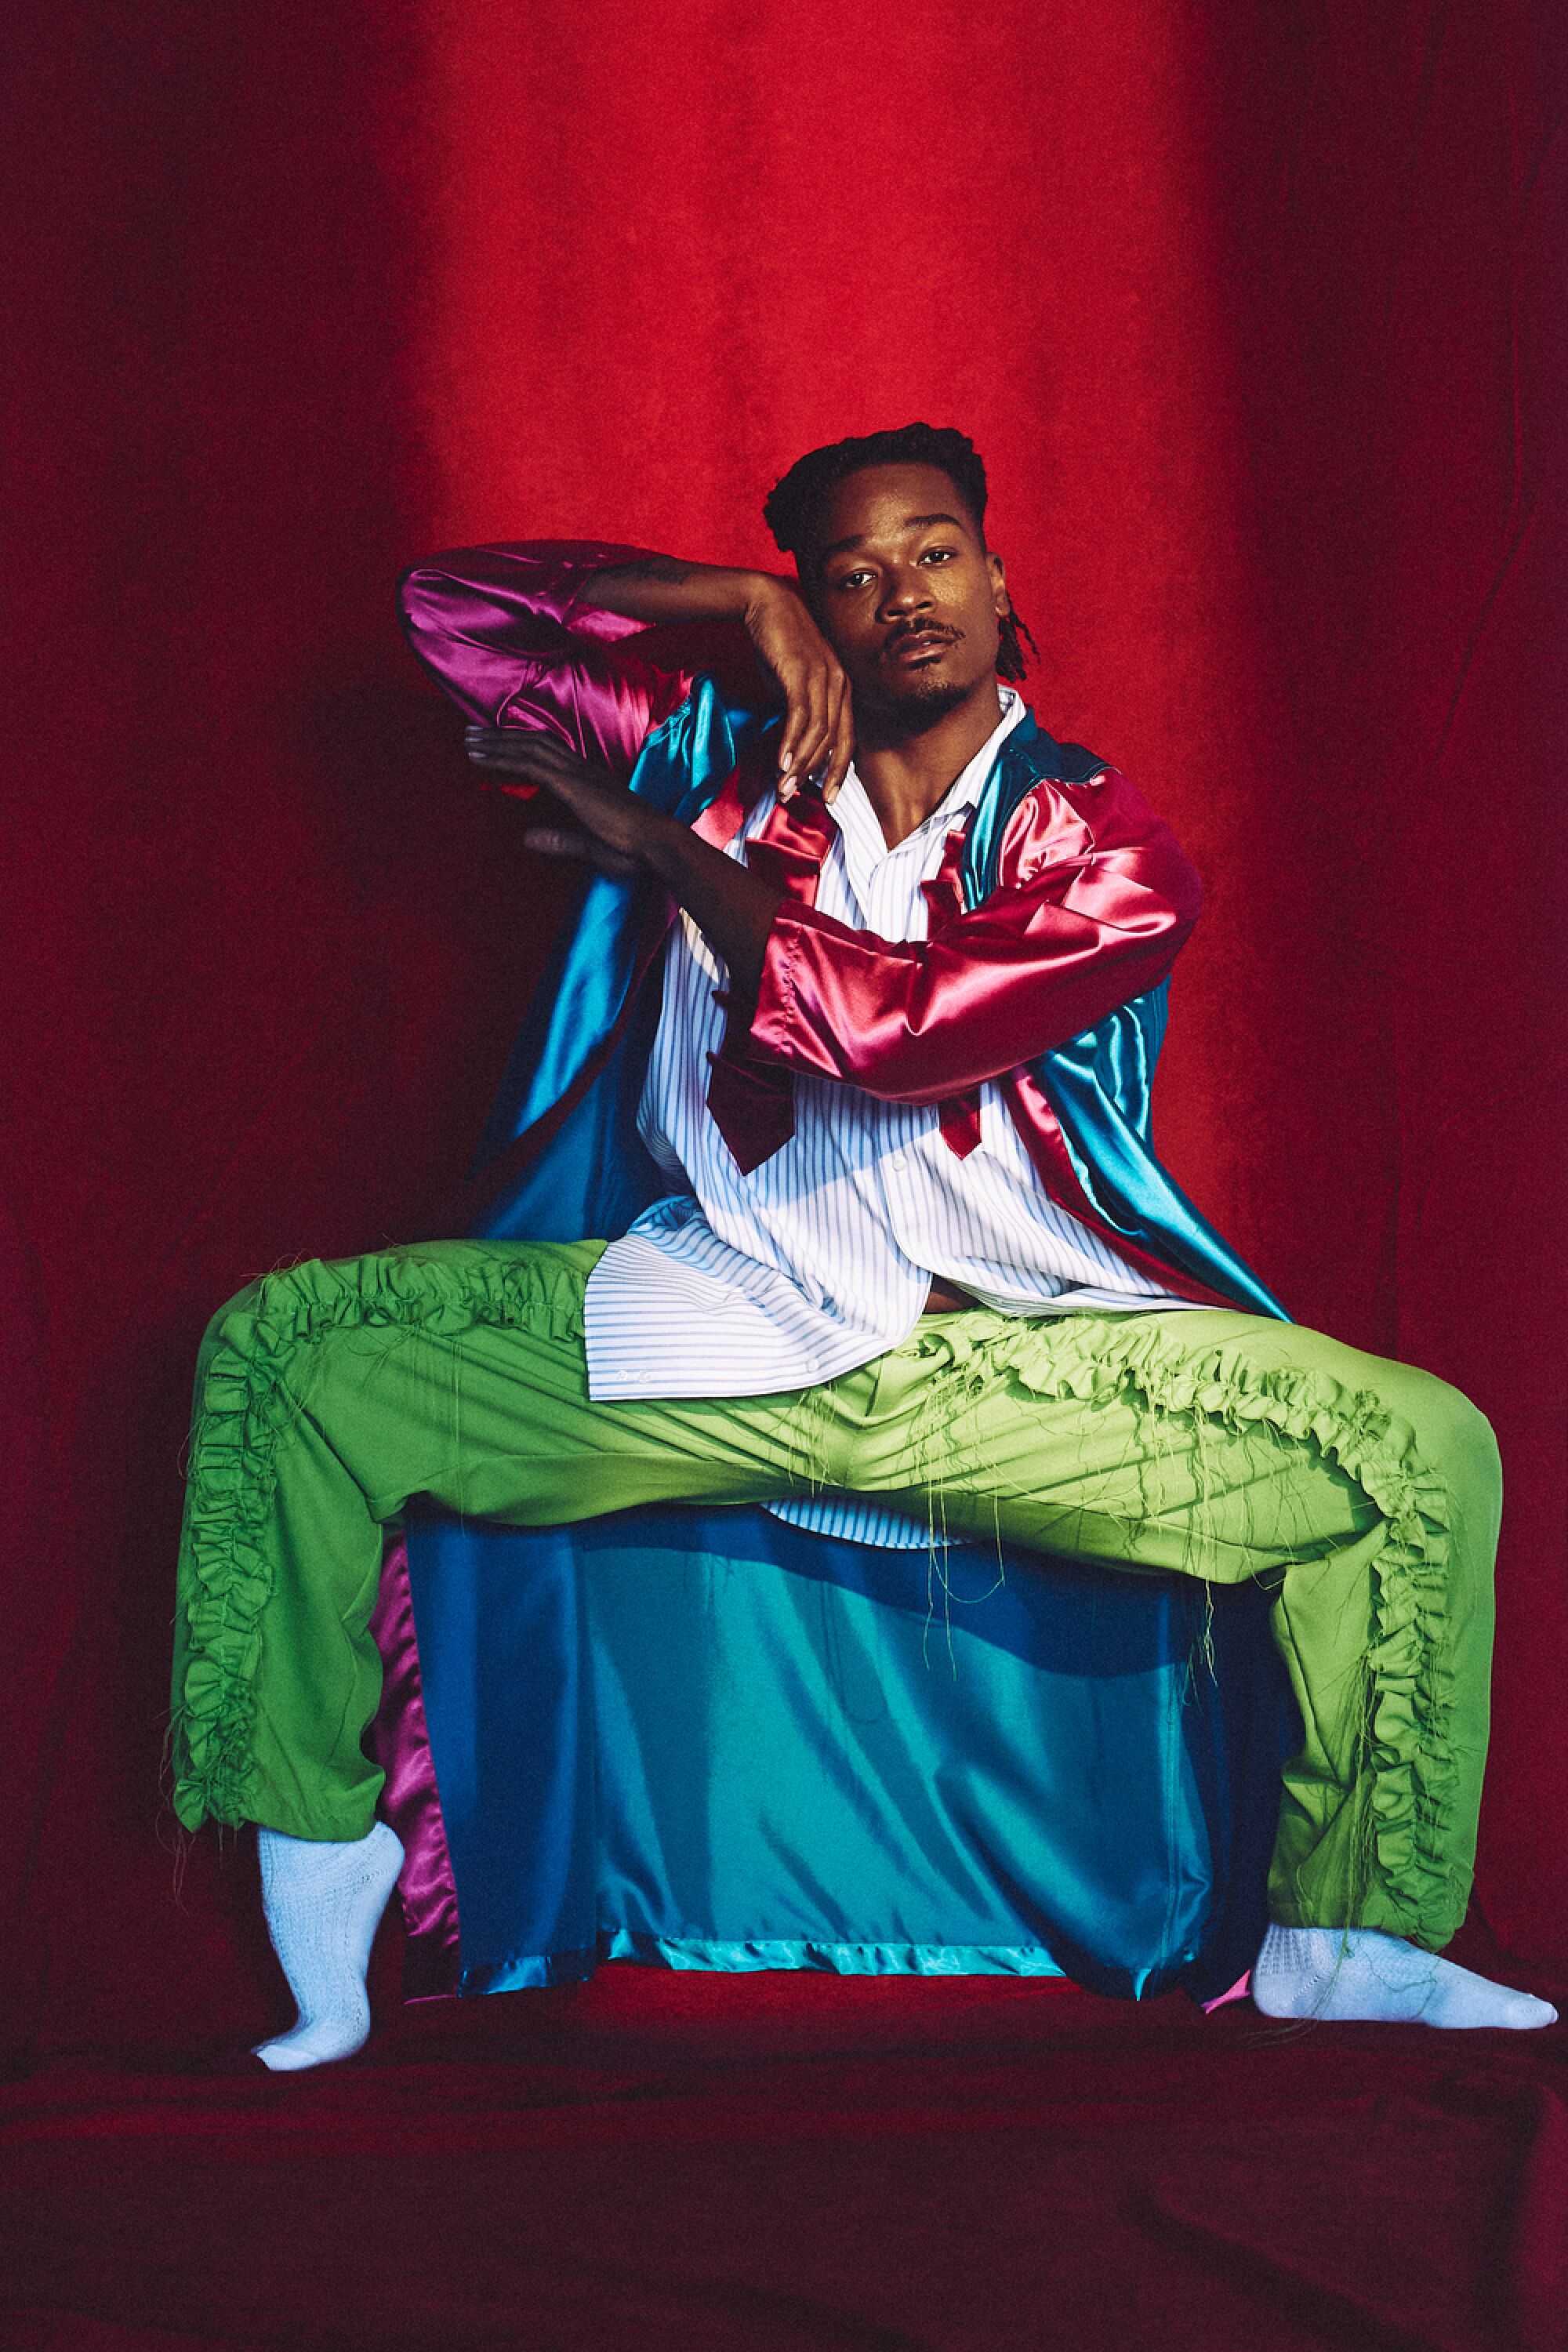 David Adrian Freeland Jr. in a robe and striped button-down shirt by Planeta, and lime green ruffled pants by Río Original.